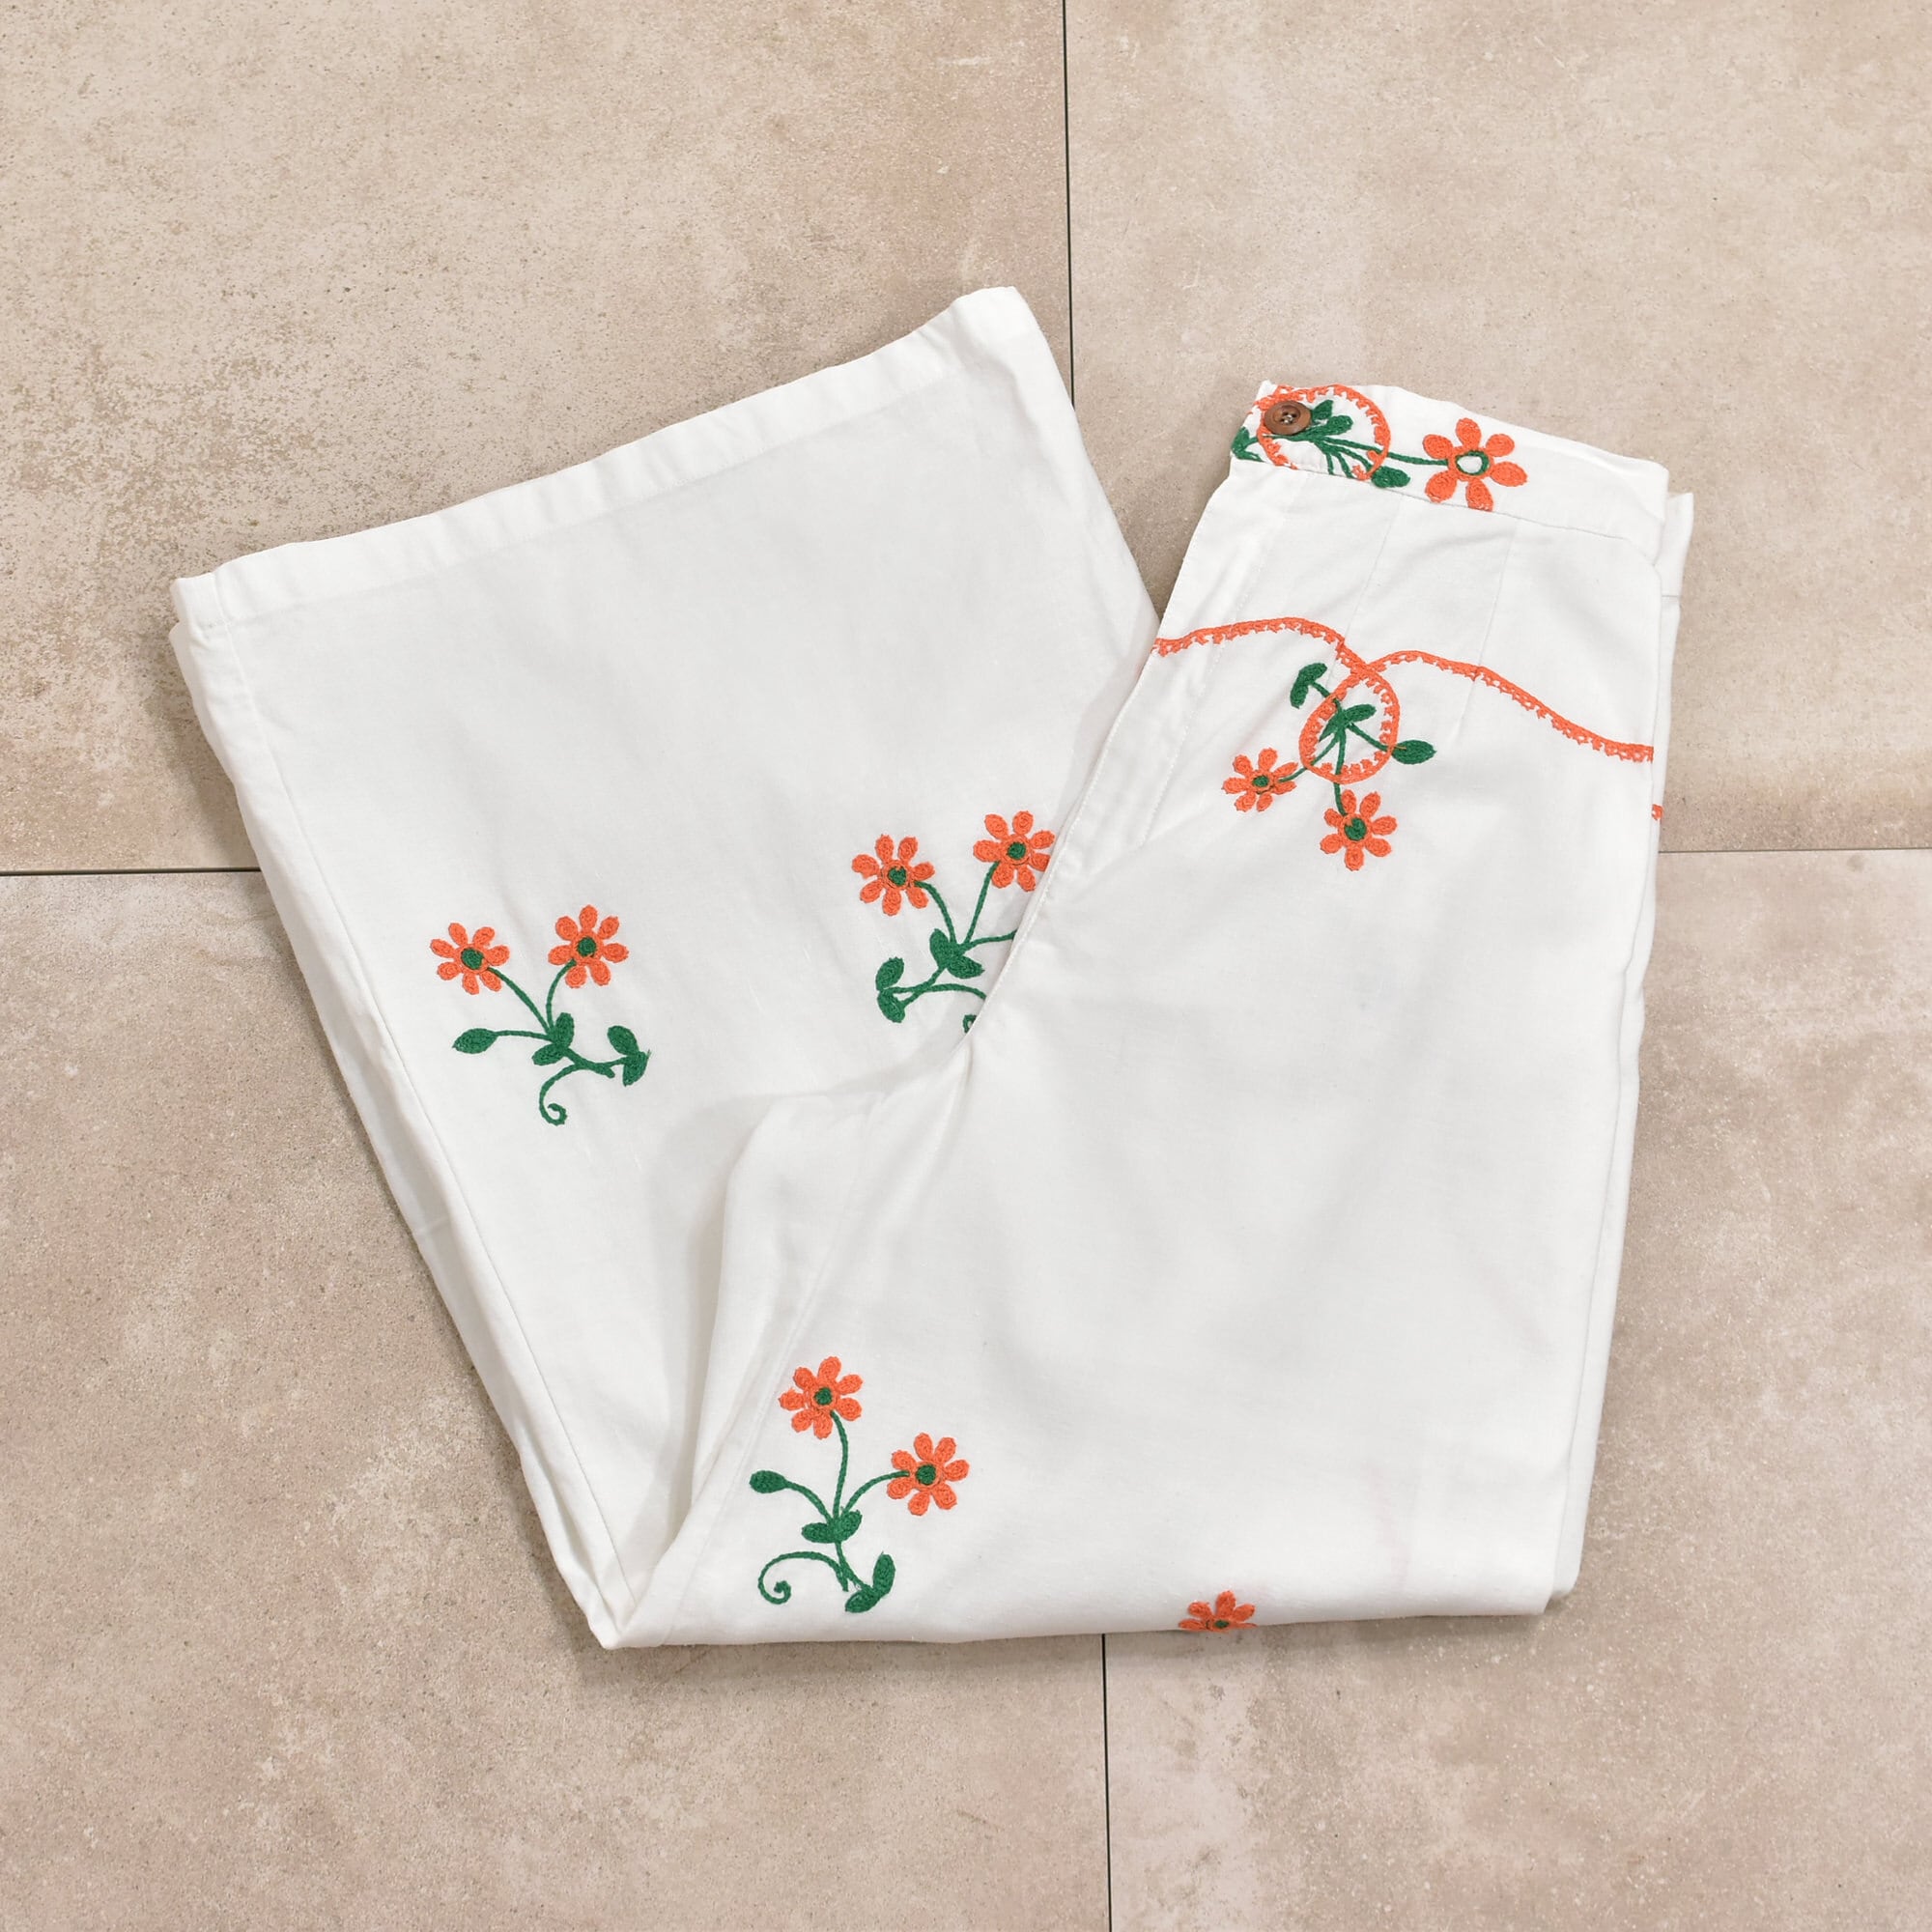 Remake Flower embroidery design baggy pants